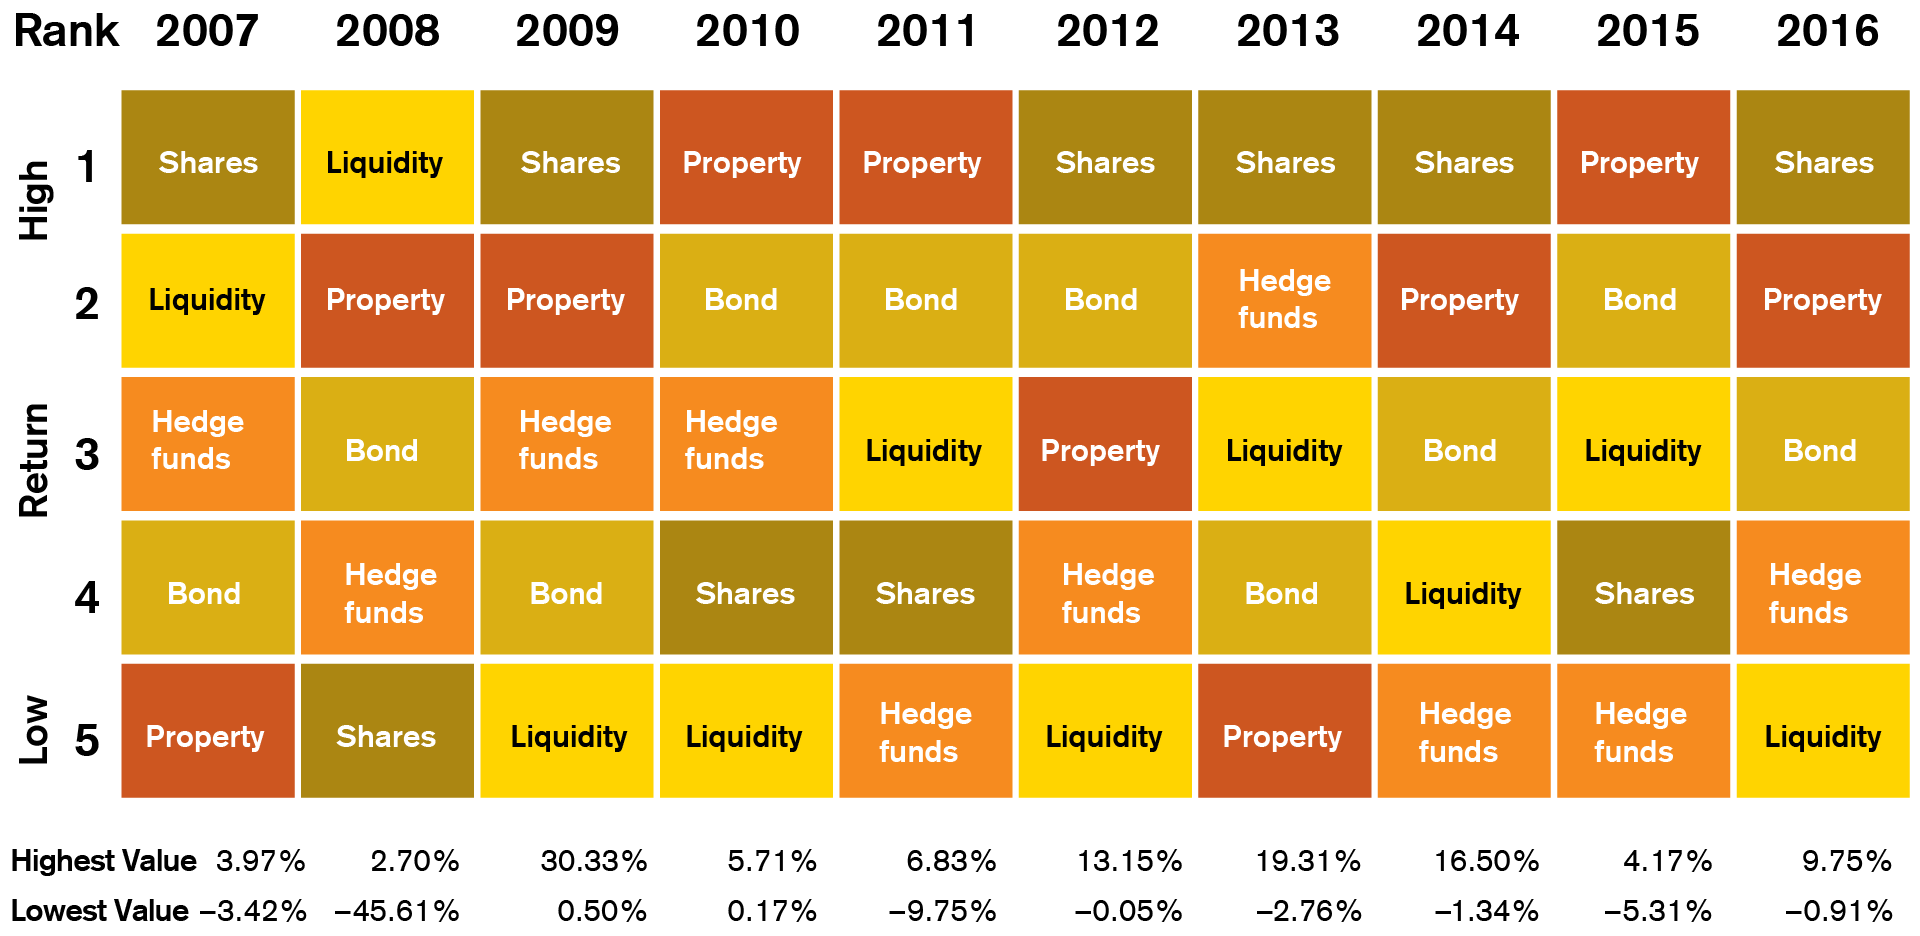 return rankings of different asset classes over time